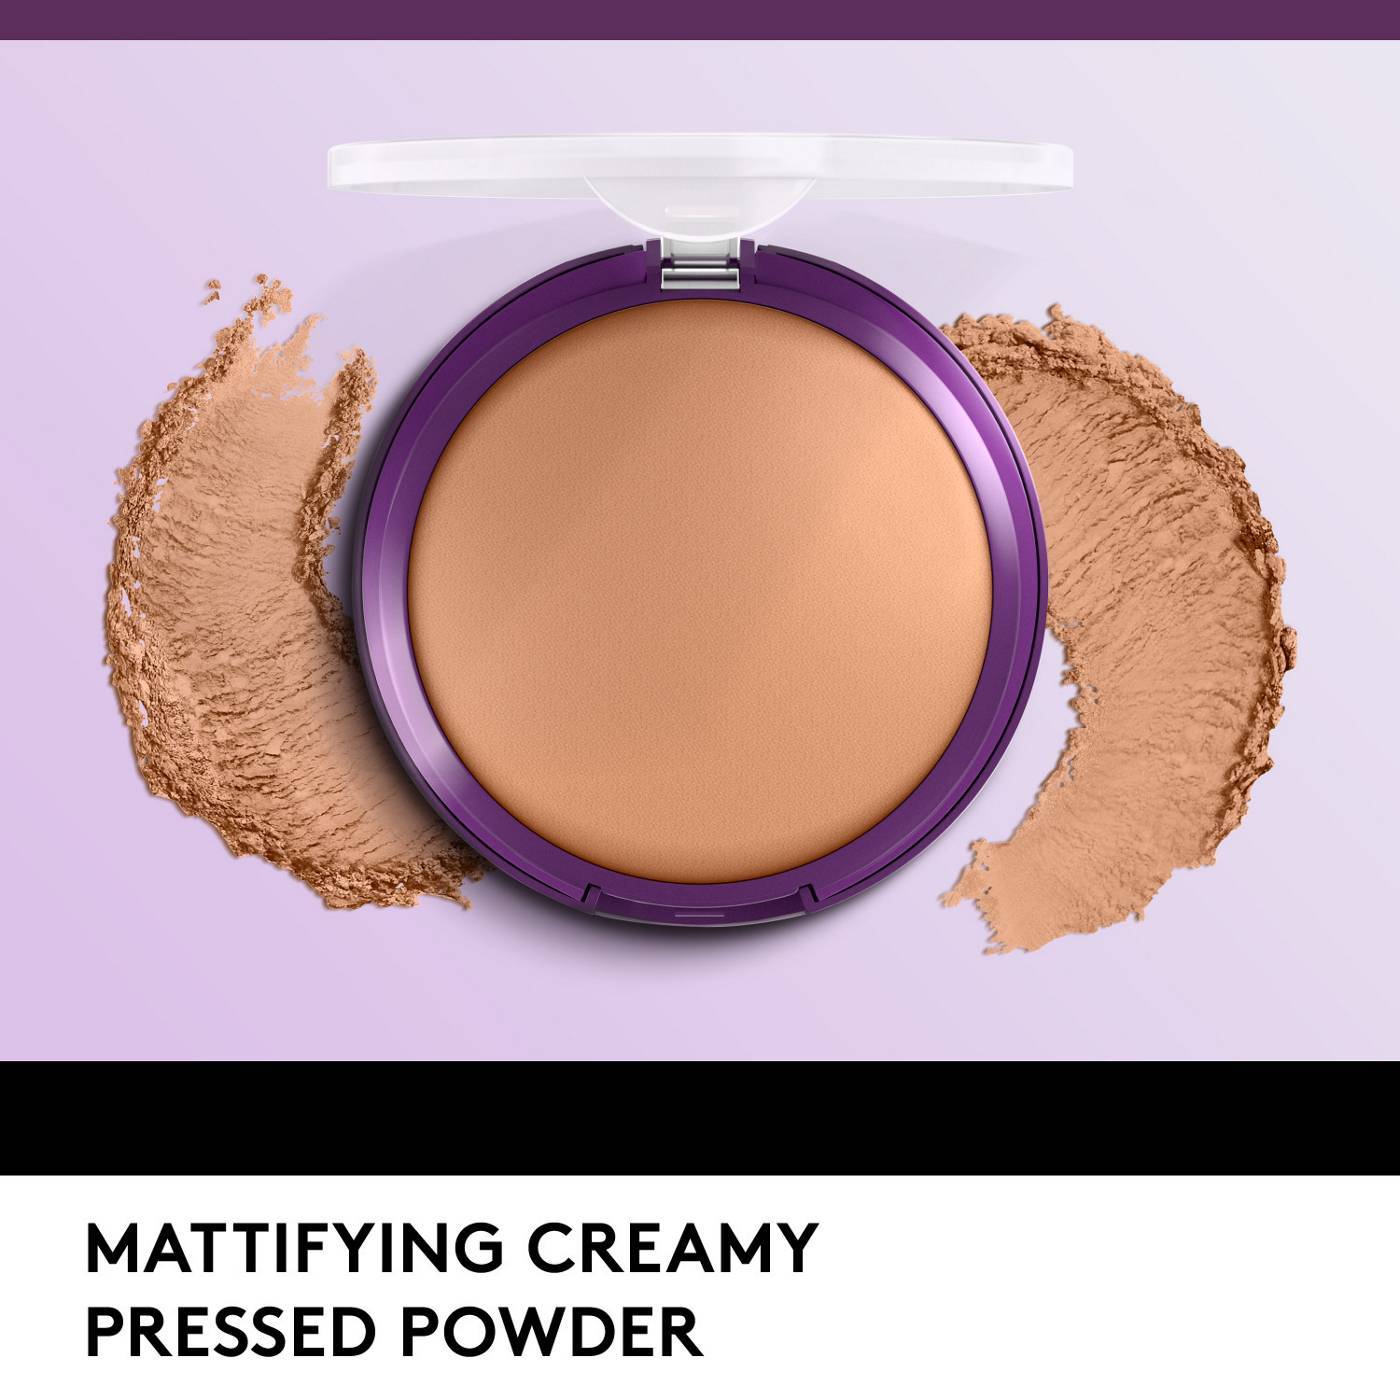 Covergirl Simply Ageless Pressed Powder 265 Tawny; image 4 of 10